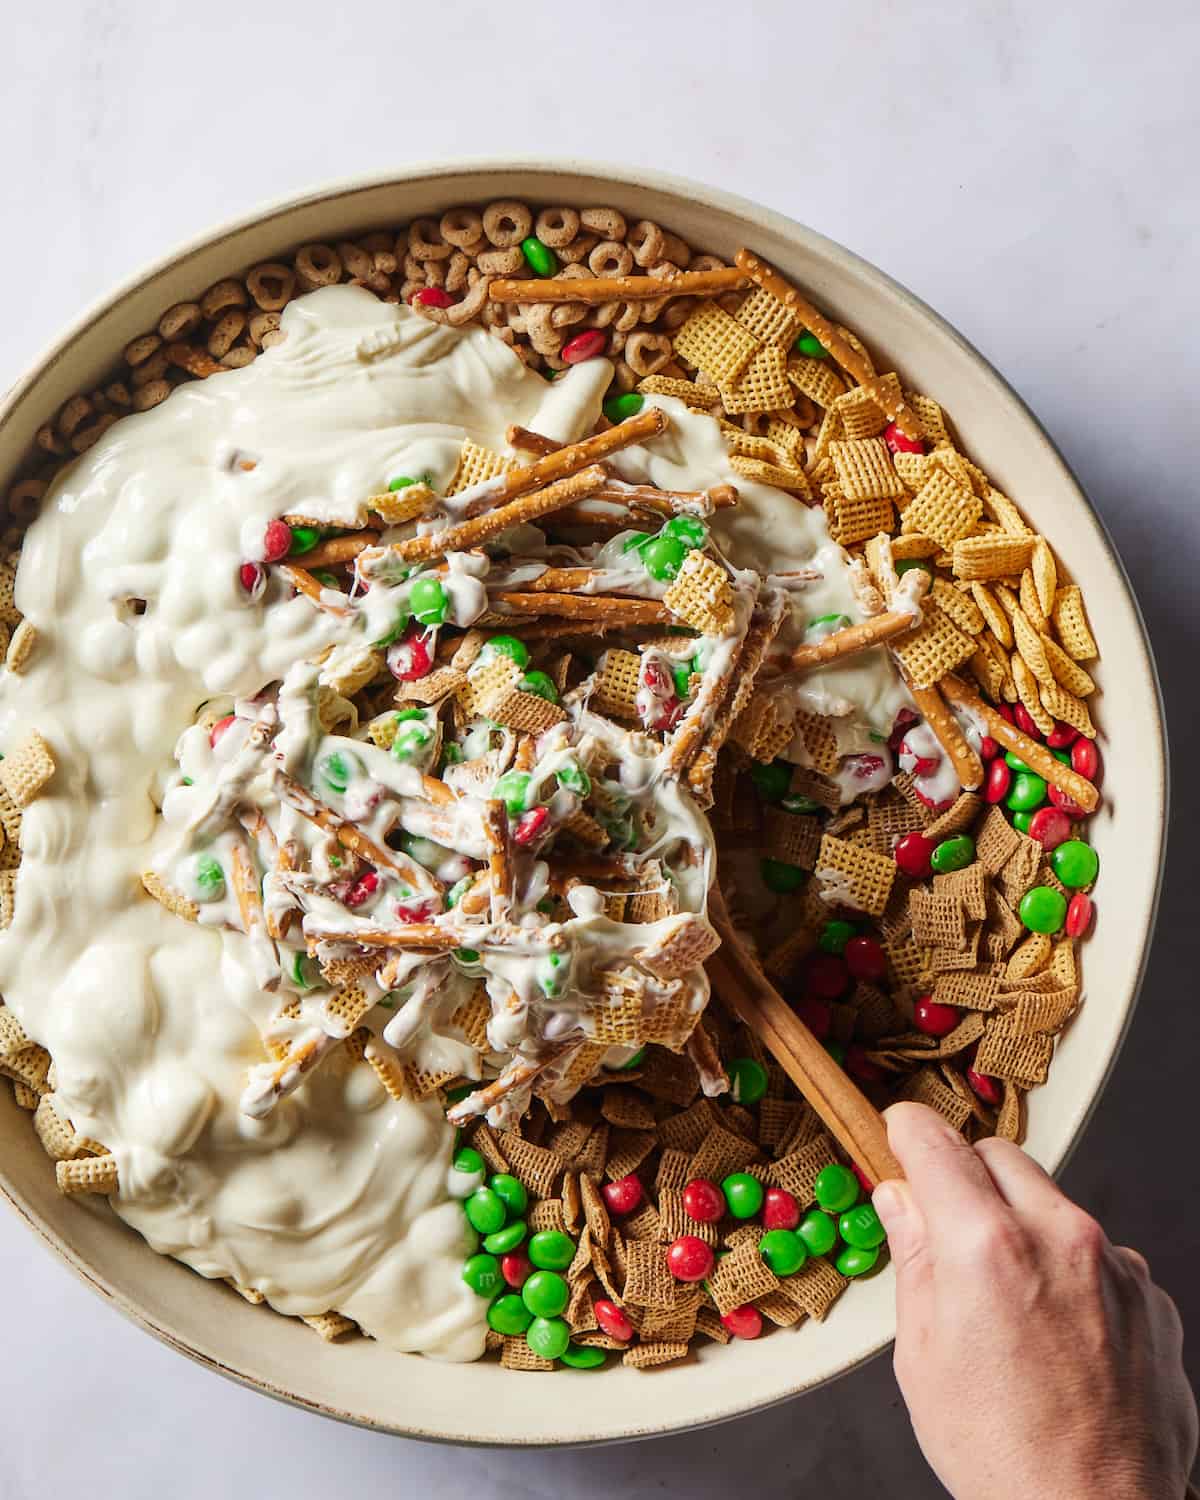 A large white round bowl with corn chex, wheat chex, rice chex, cheerios and pretzel sticks plus red and green M&Ms in it, topped with molten white chocolate drizzled on top and a woman's hand using a wooden spoon to mix the white chocolate in.